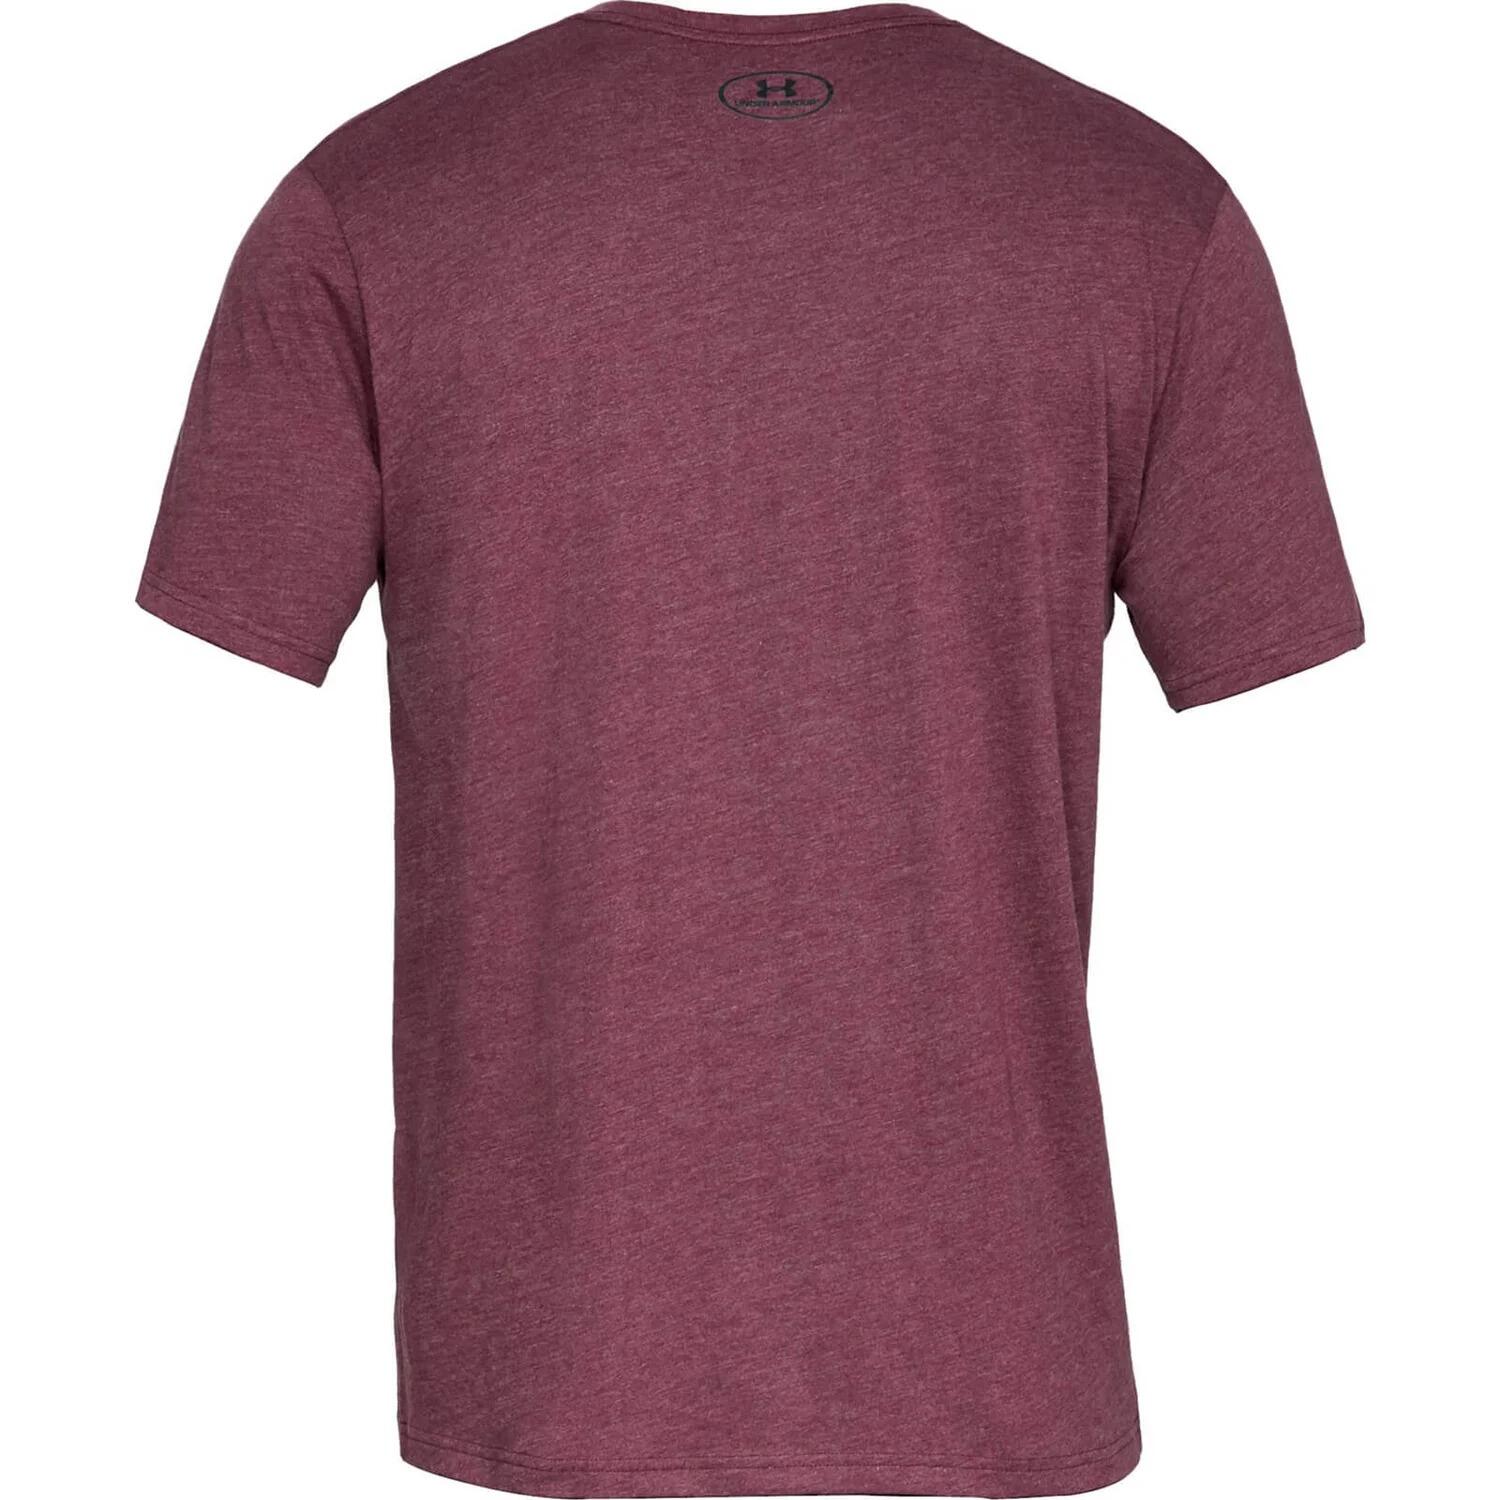 Under Armour Mens Sportstyle Left Chest Tee 2/3